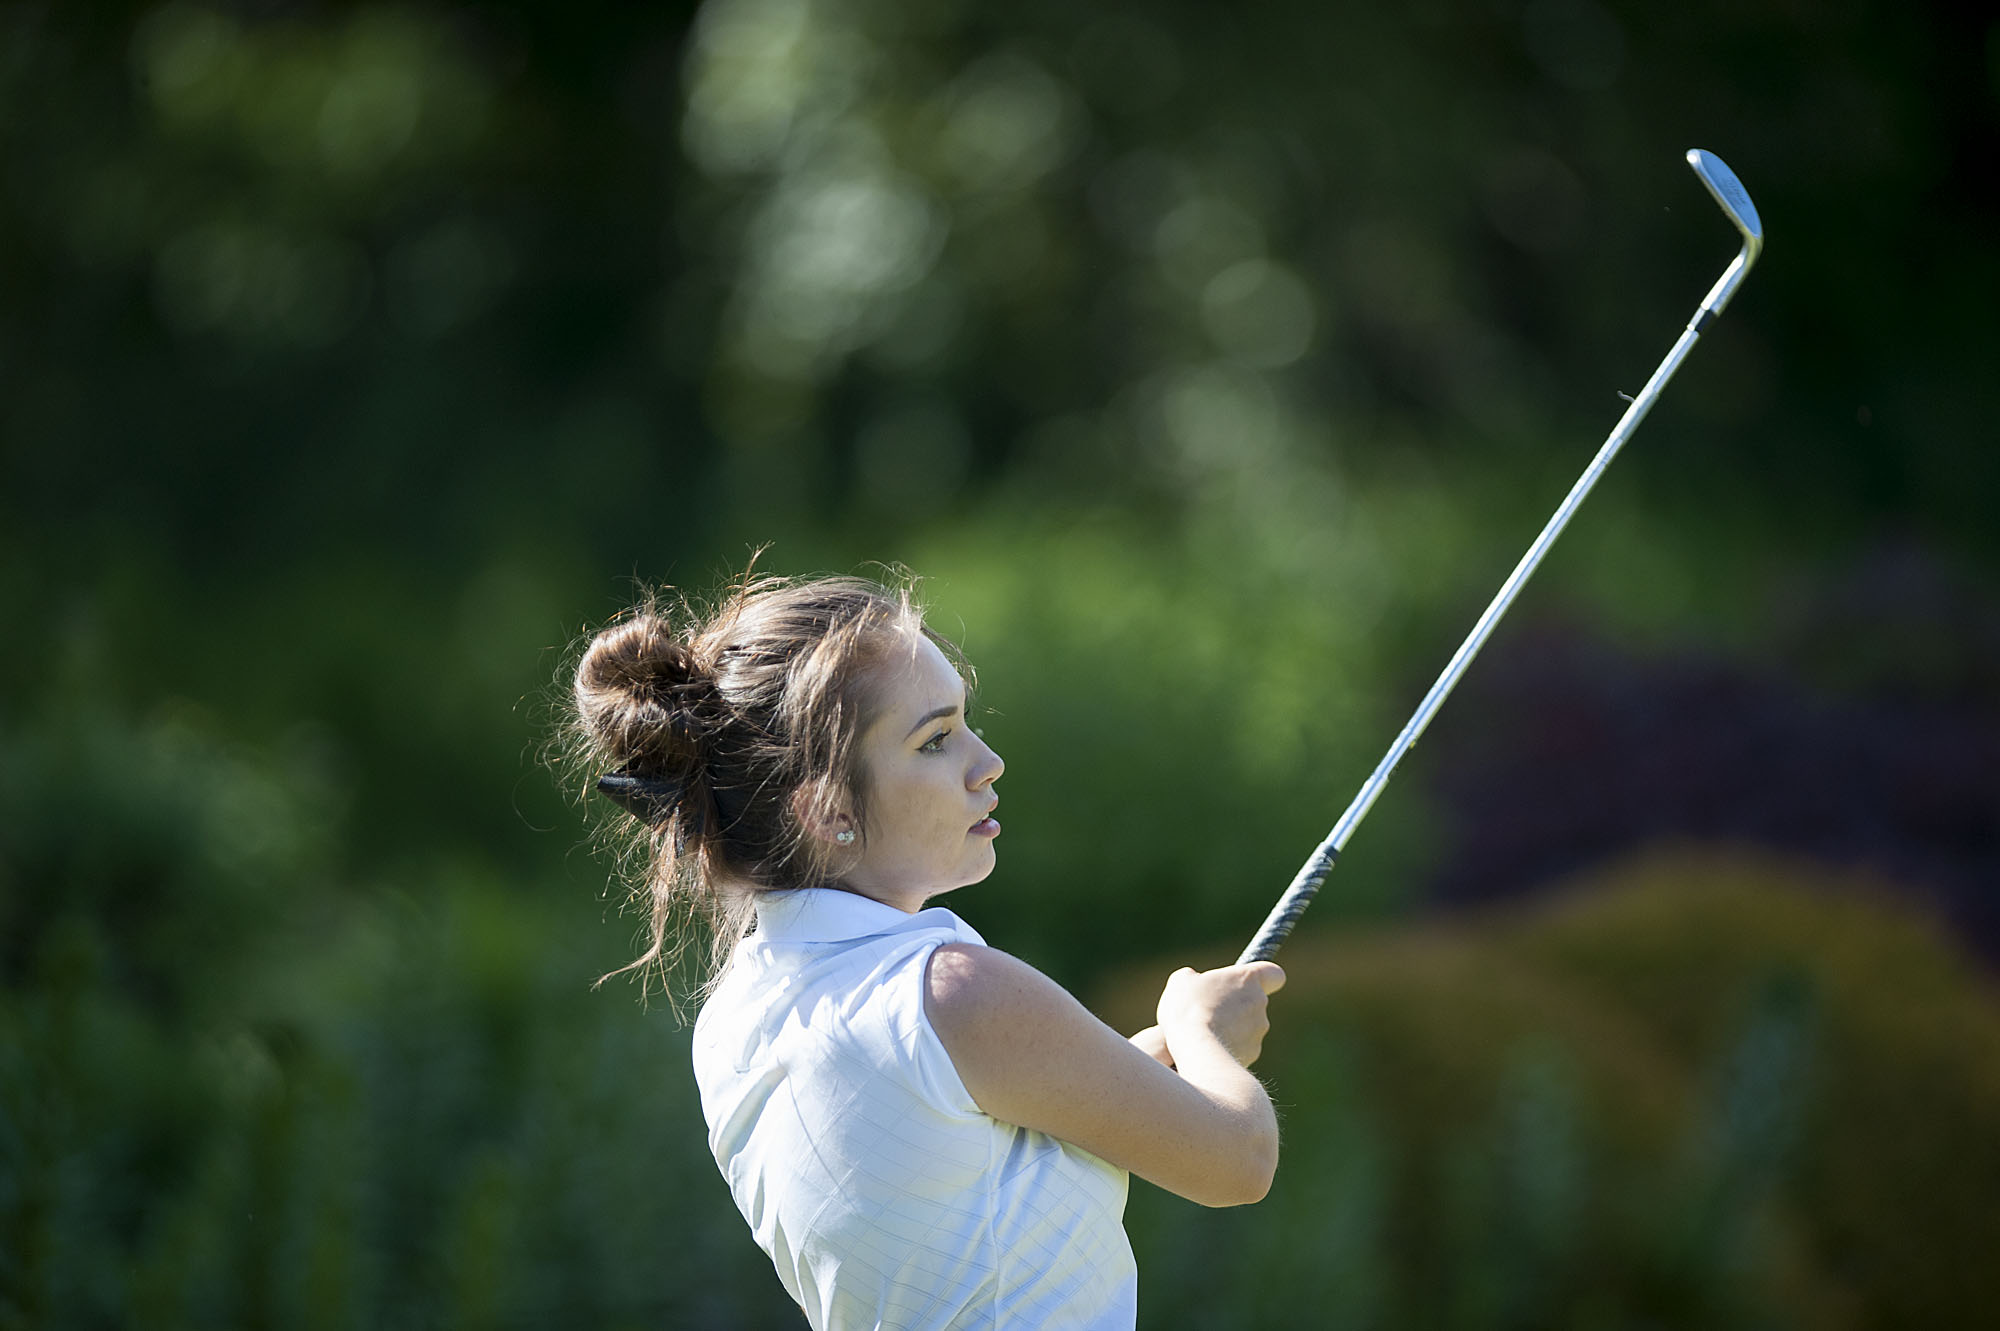 Union's Reilly Whitlock tees off on the 17th hole Tuesday afternoon, May 10, 2016 at Lewis River Golf Course.